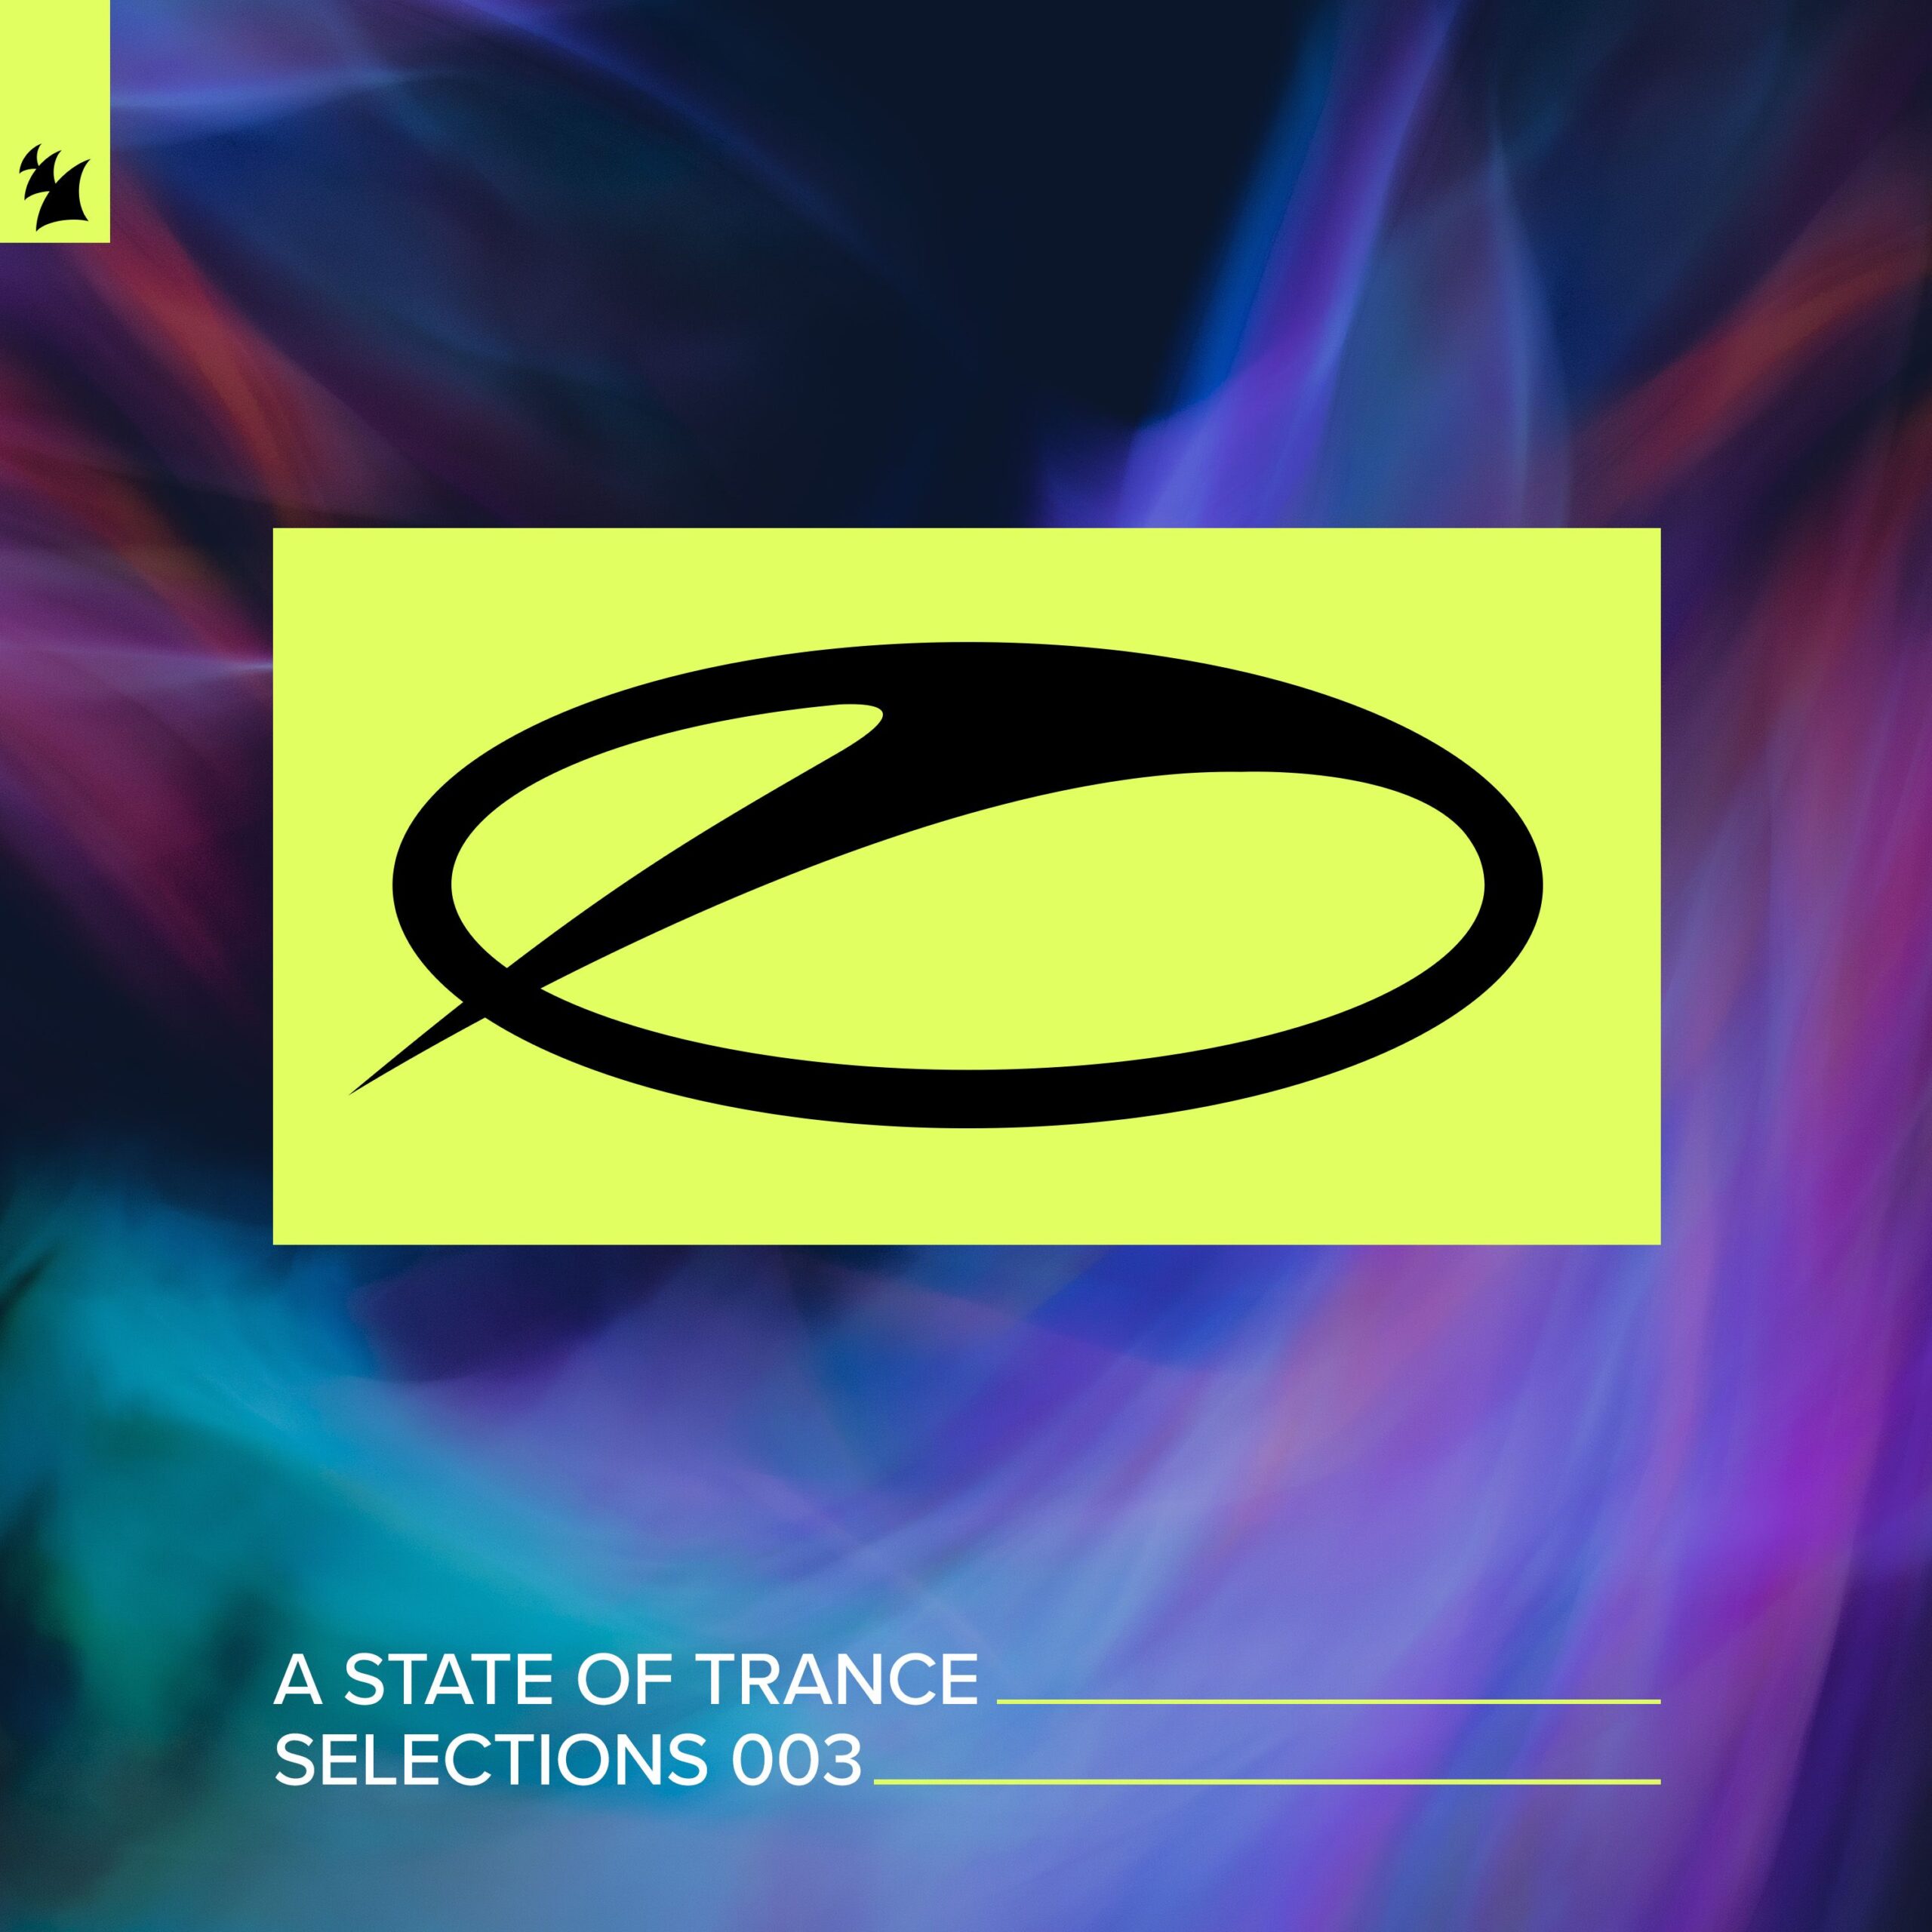 Various Artists presents A State Of Trance Selections 003 on Armada Music